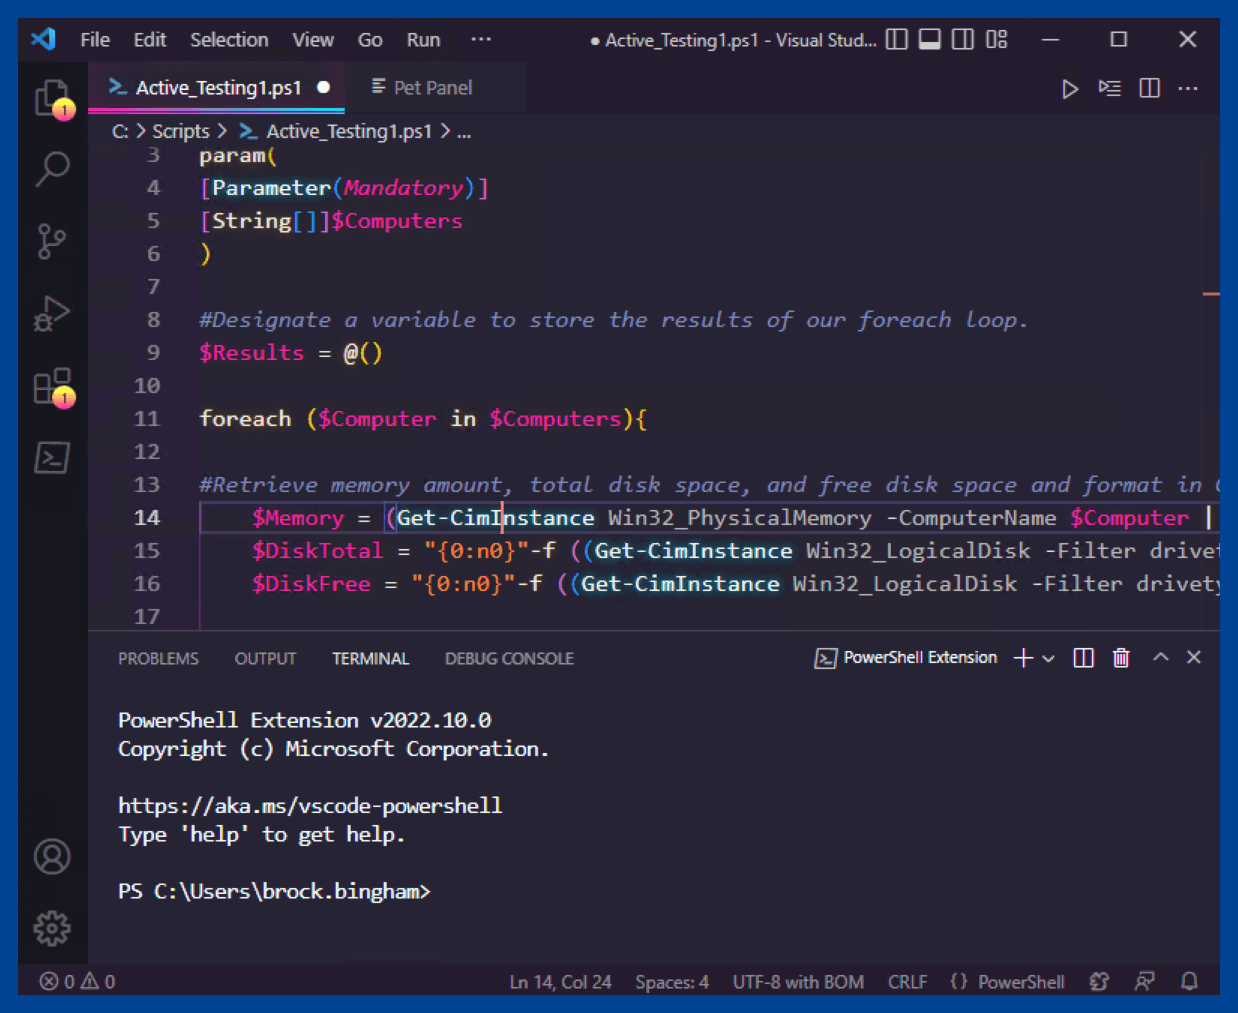 The SynthWave '84 theme in VS Code